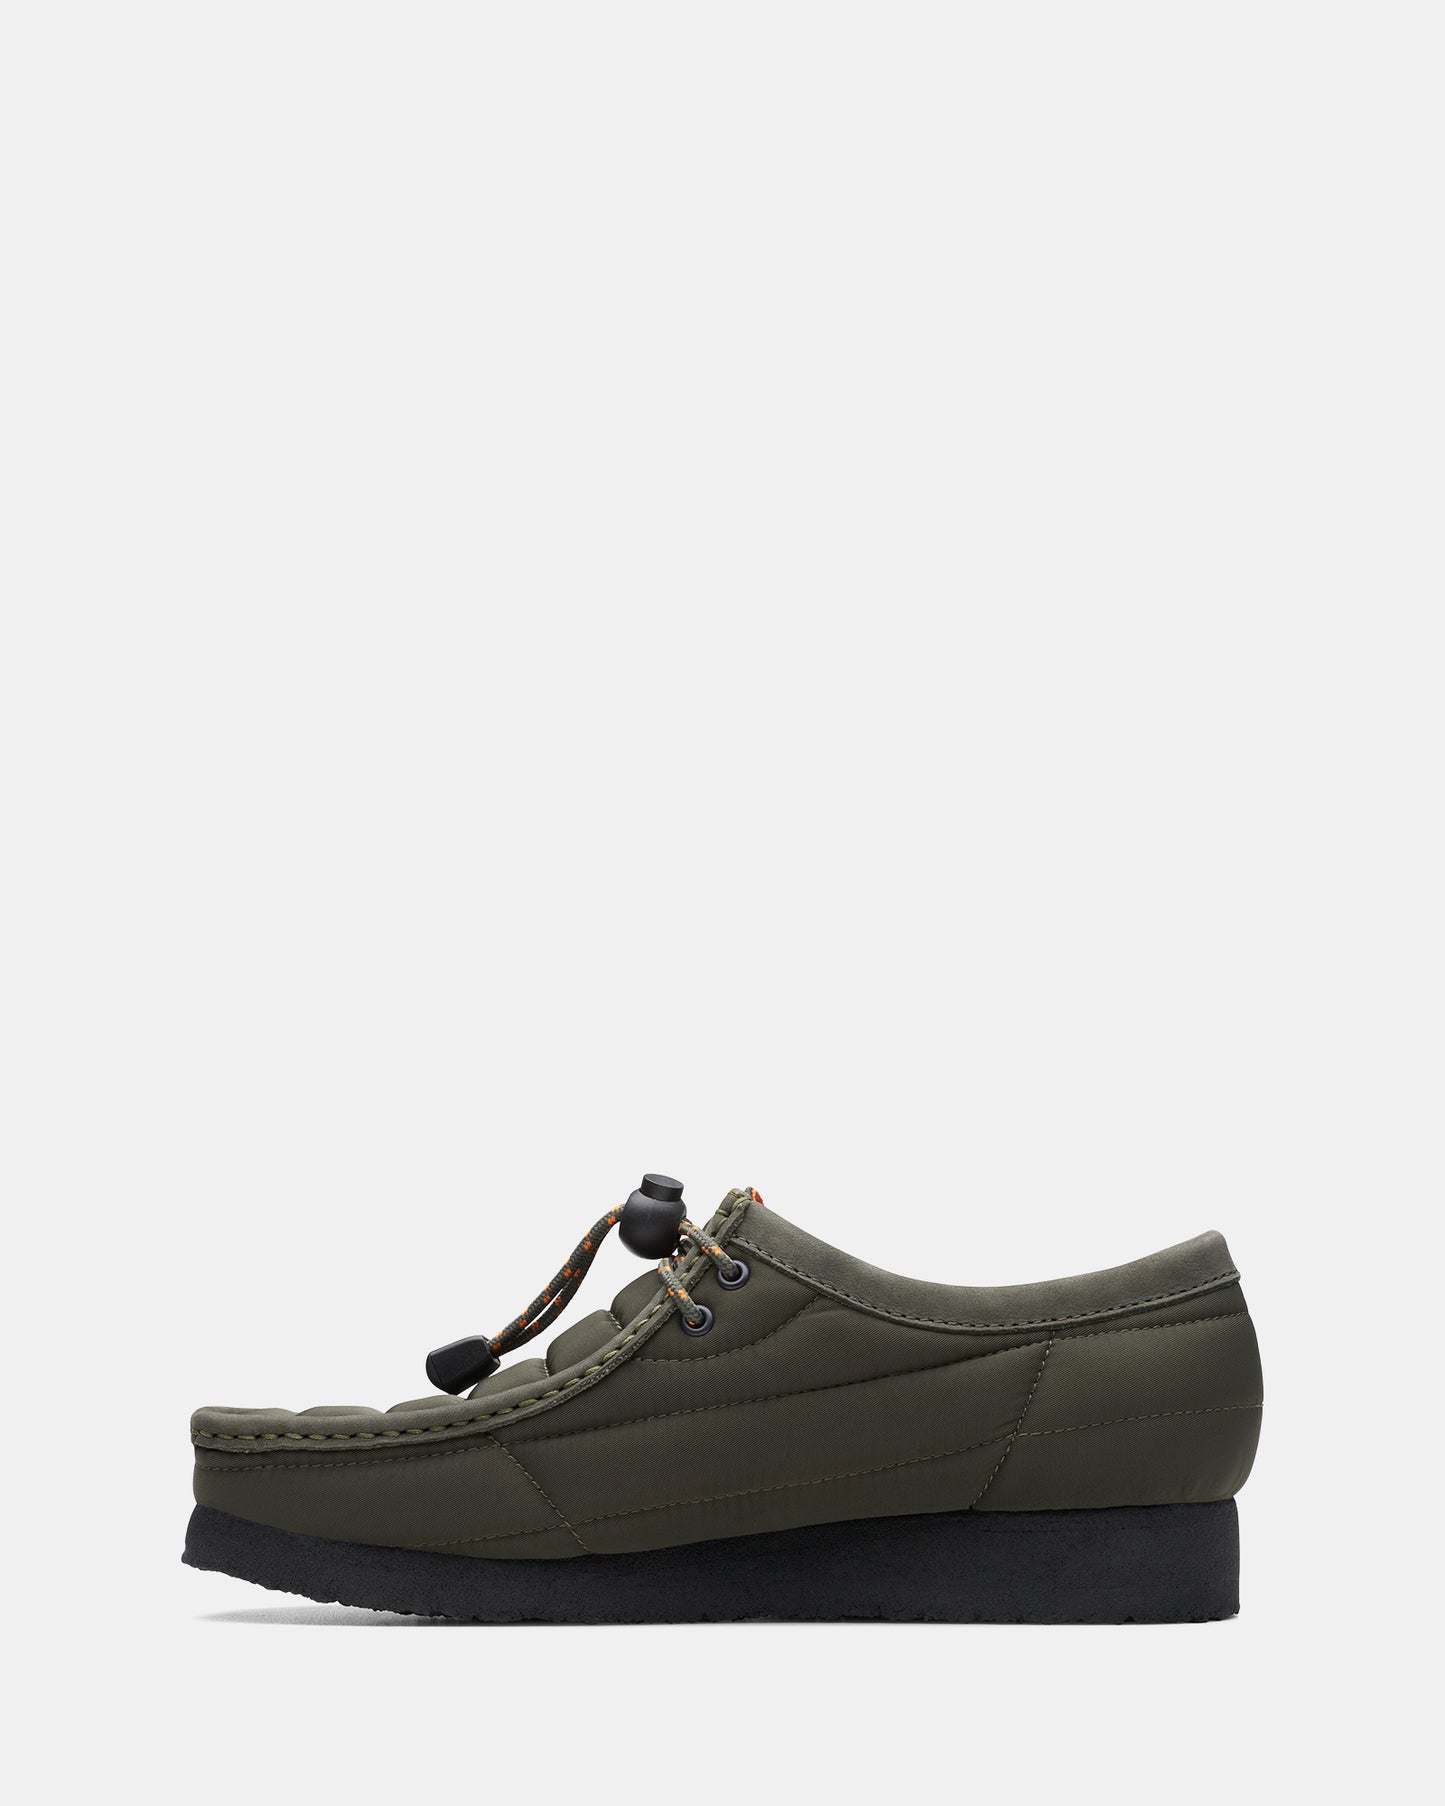 Wallabee (M) Khaki Quilted